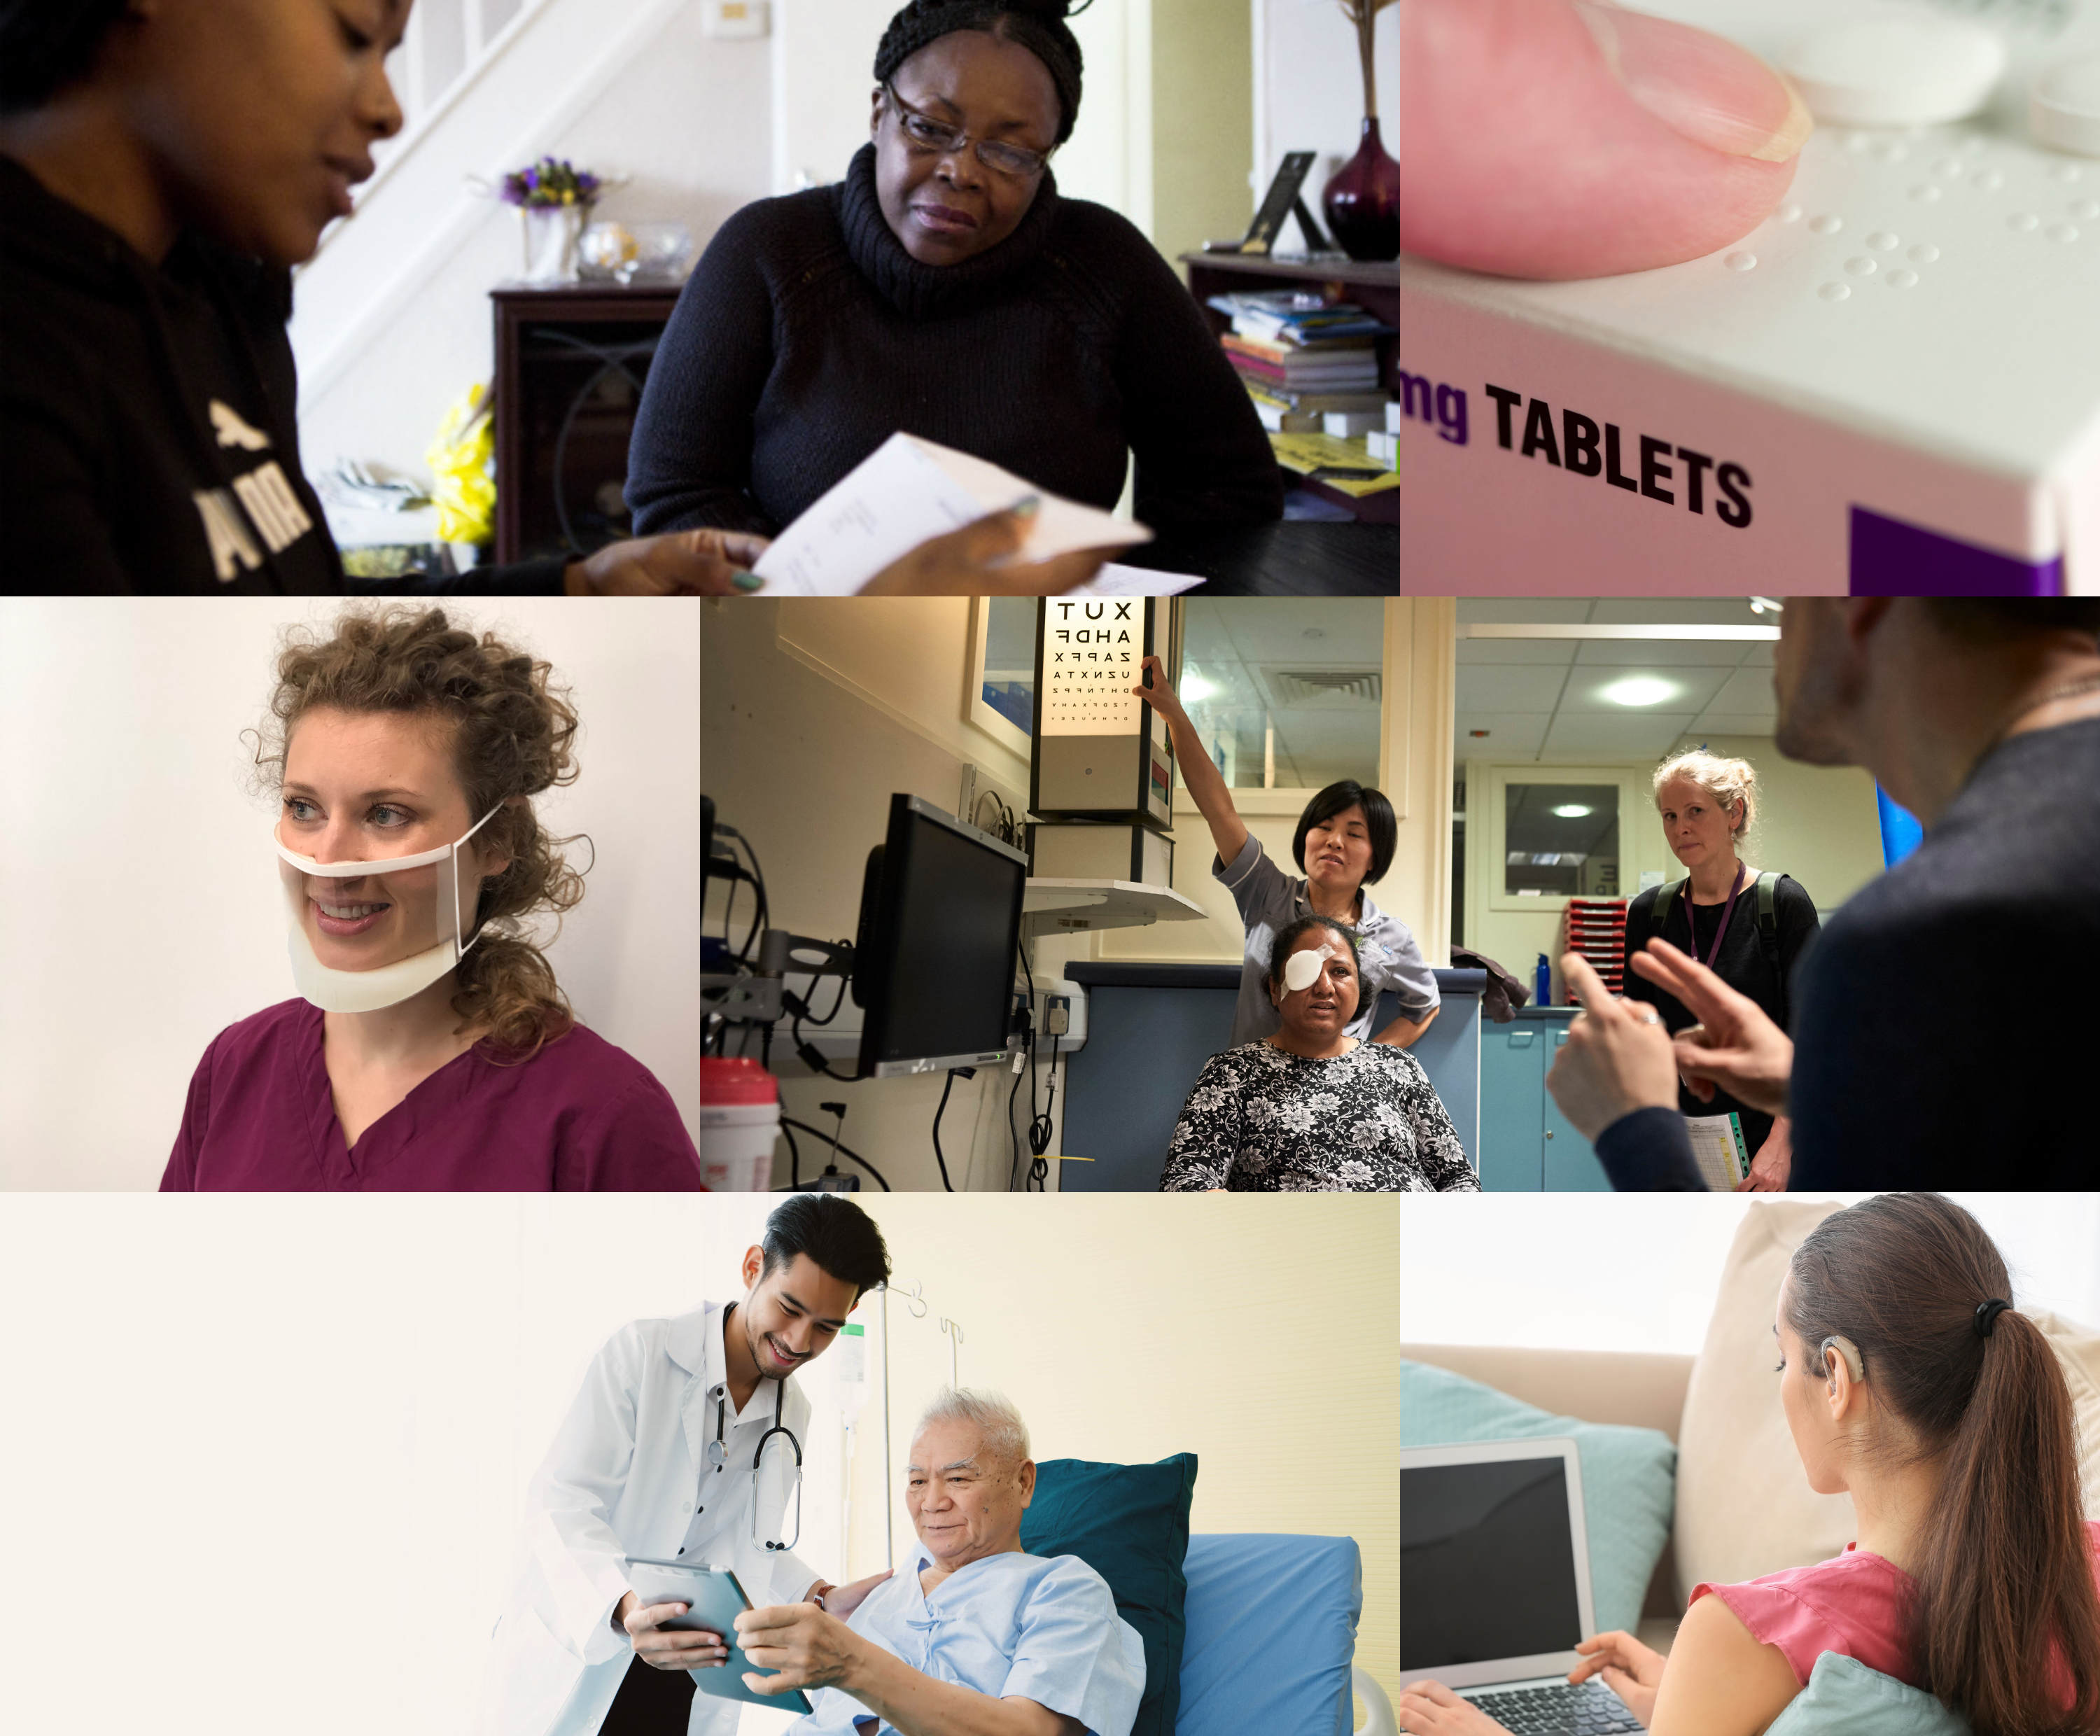 Collage of photos depicting different types of communication access to NHS health services